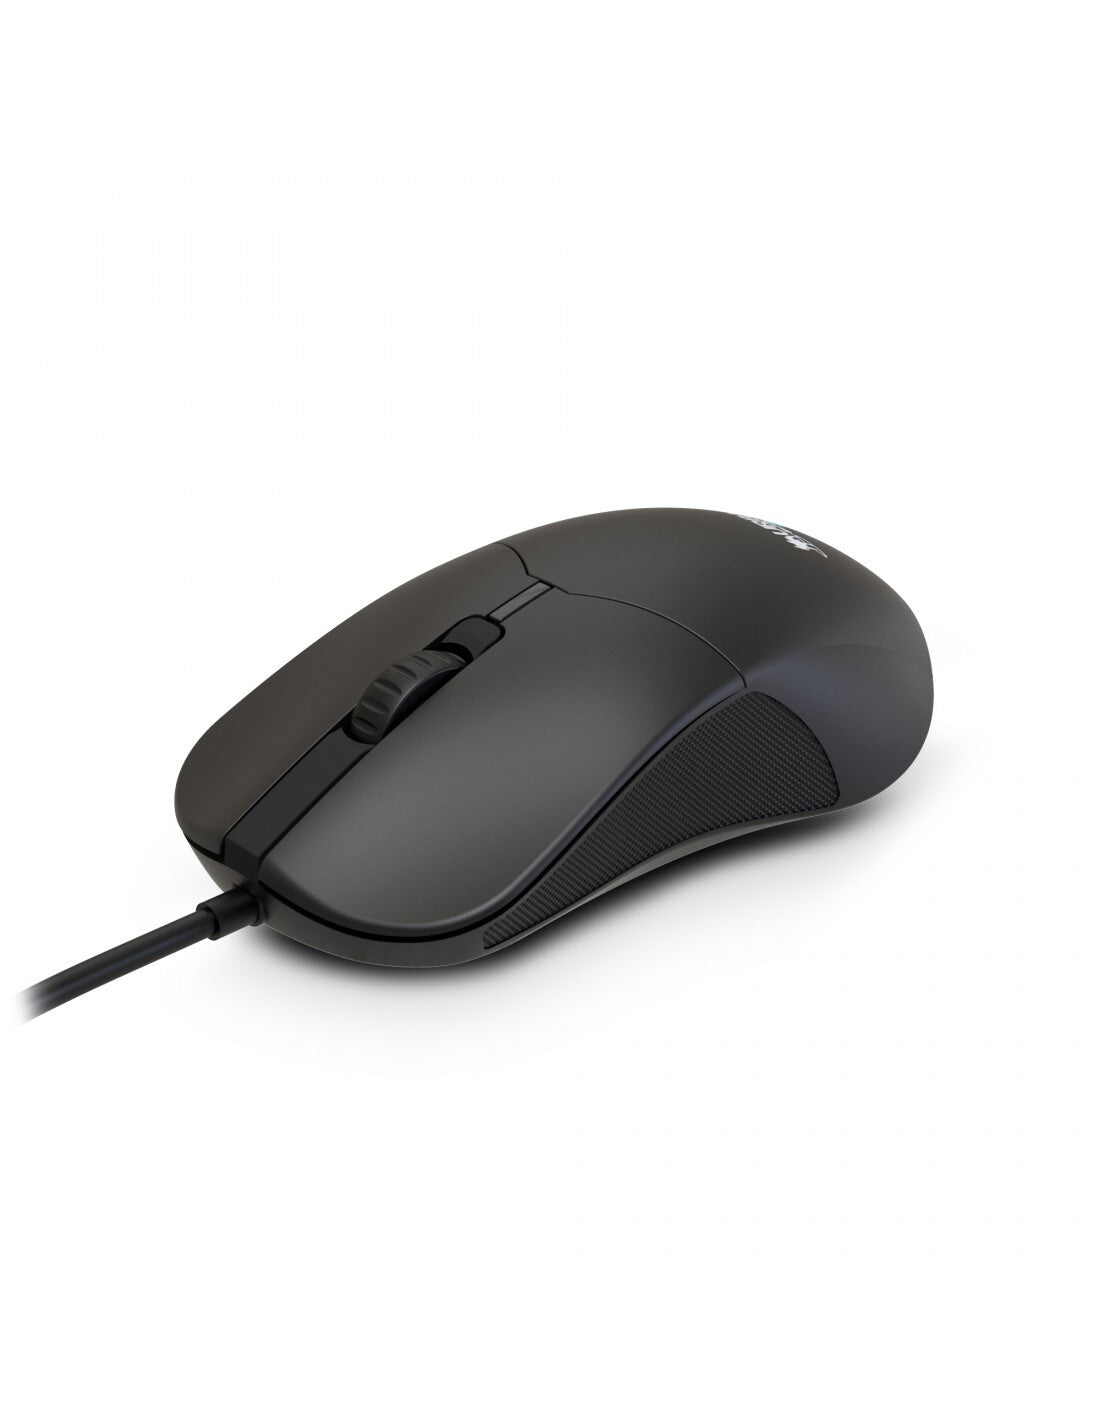 Urban Factory Cyclee - Wired USB Type-A Optical Mouse in Black - 1,200 DPI